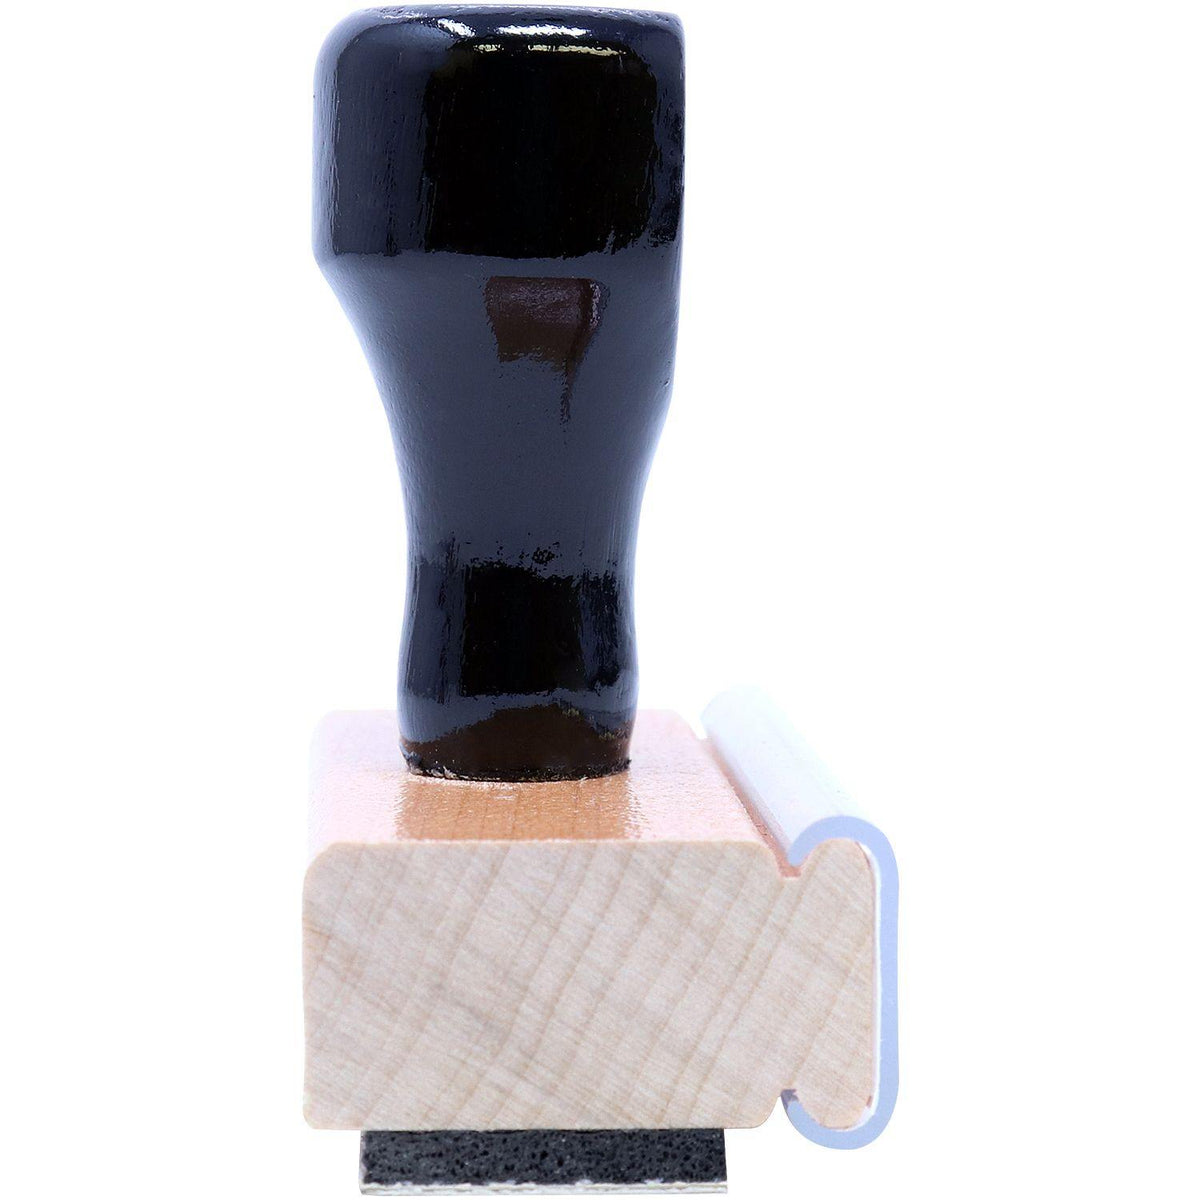 Side View of Large Broker Copy Rubber Stamp